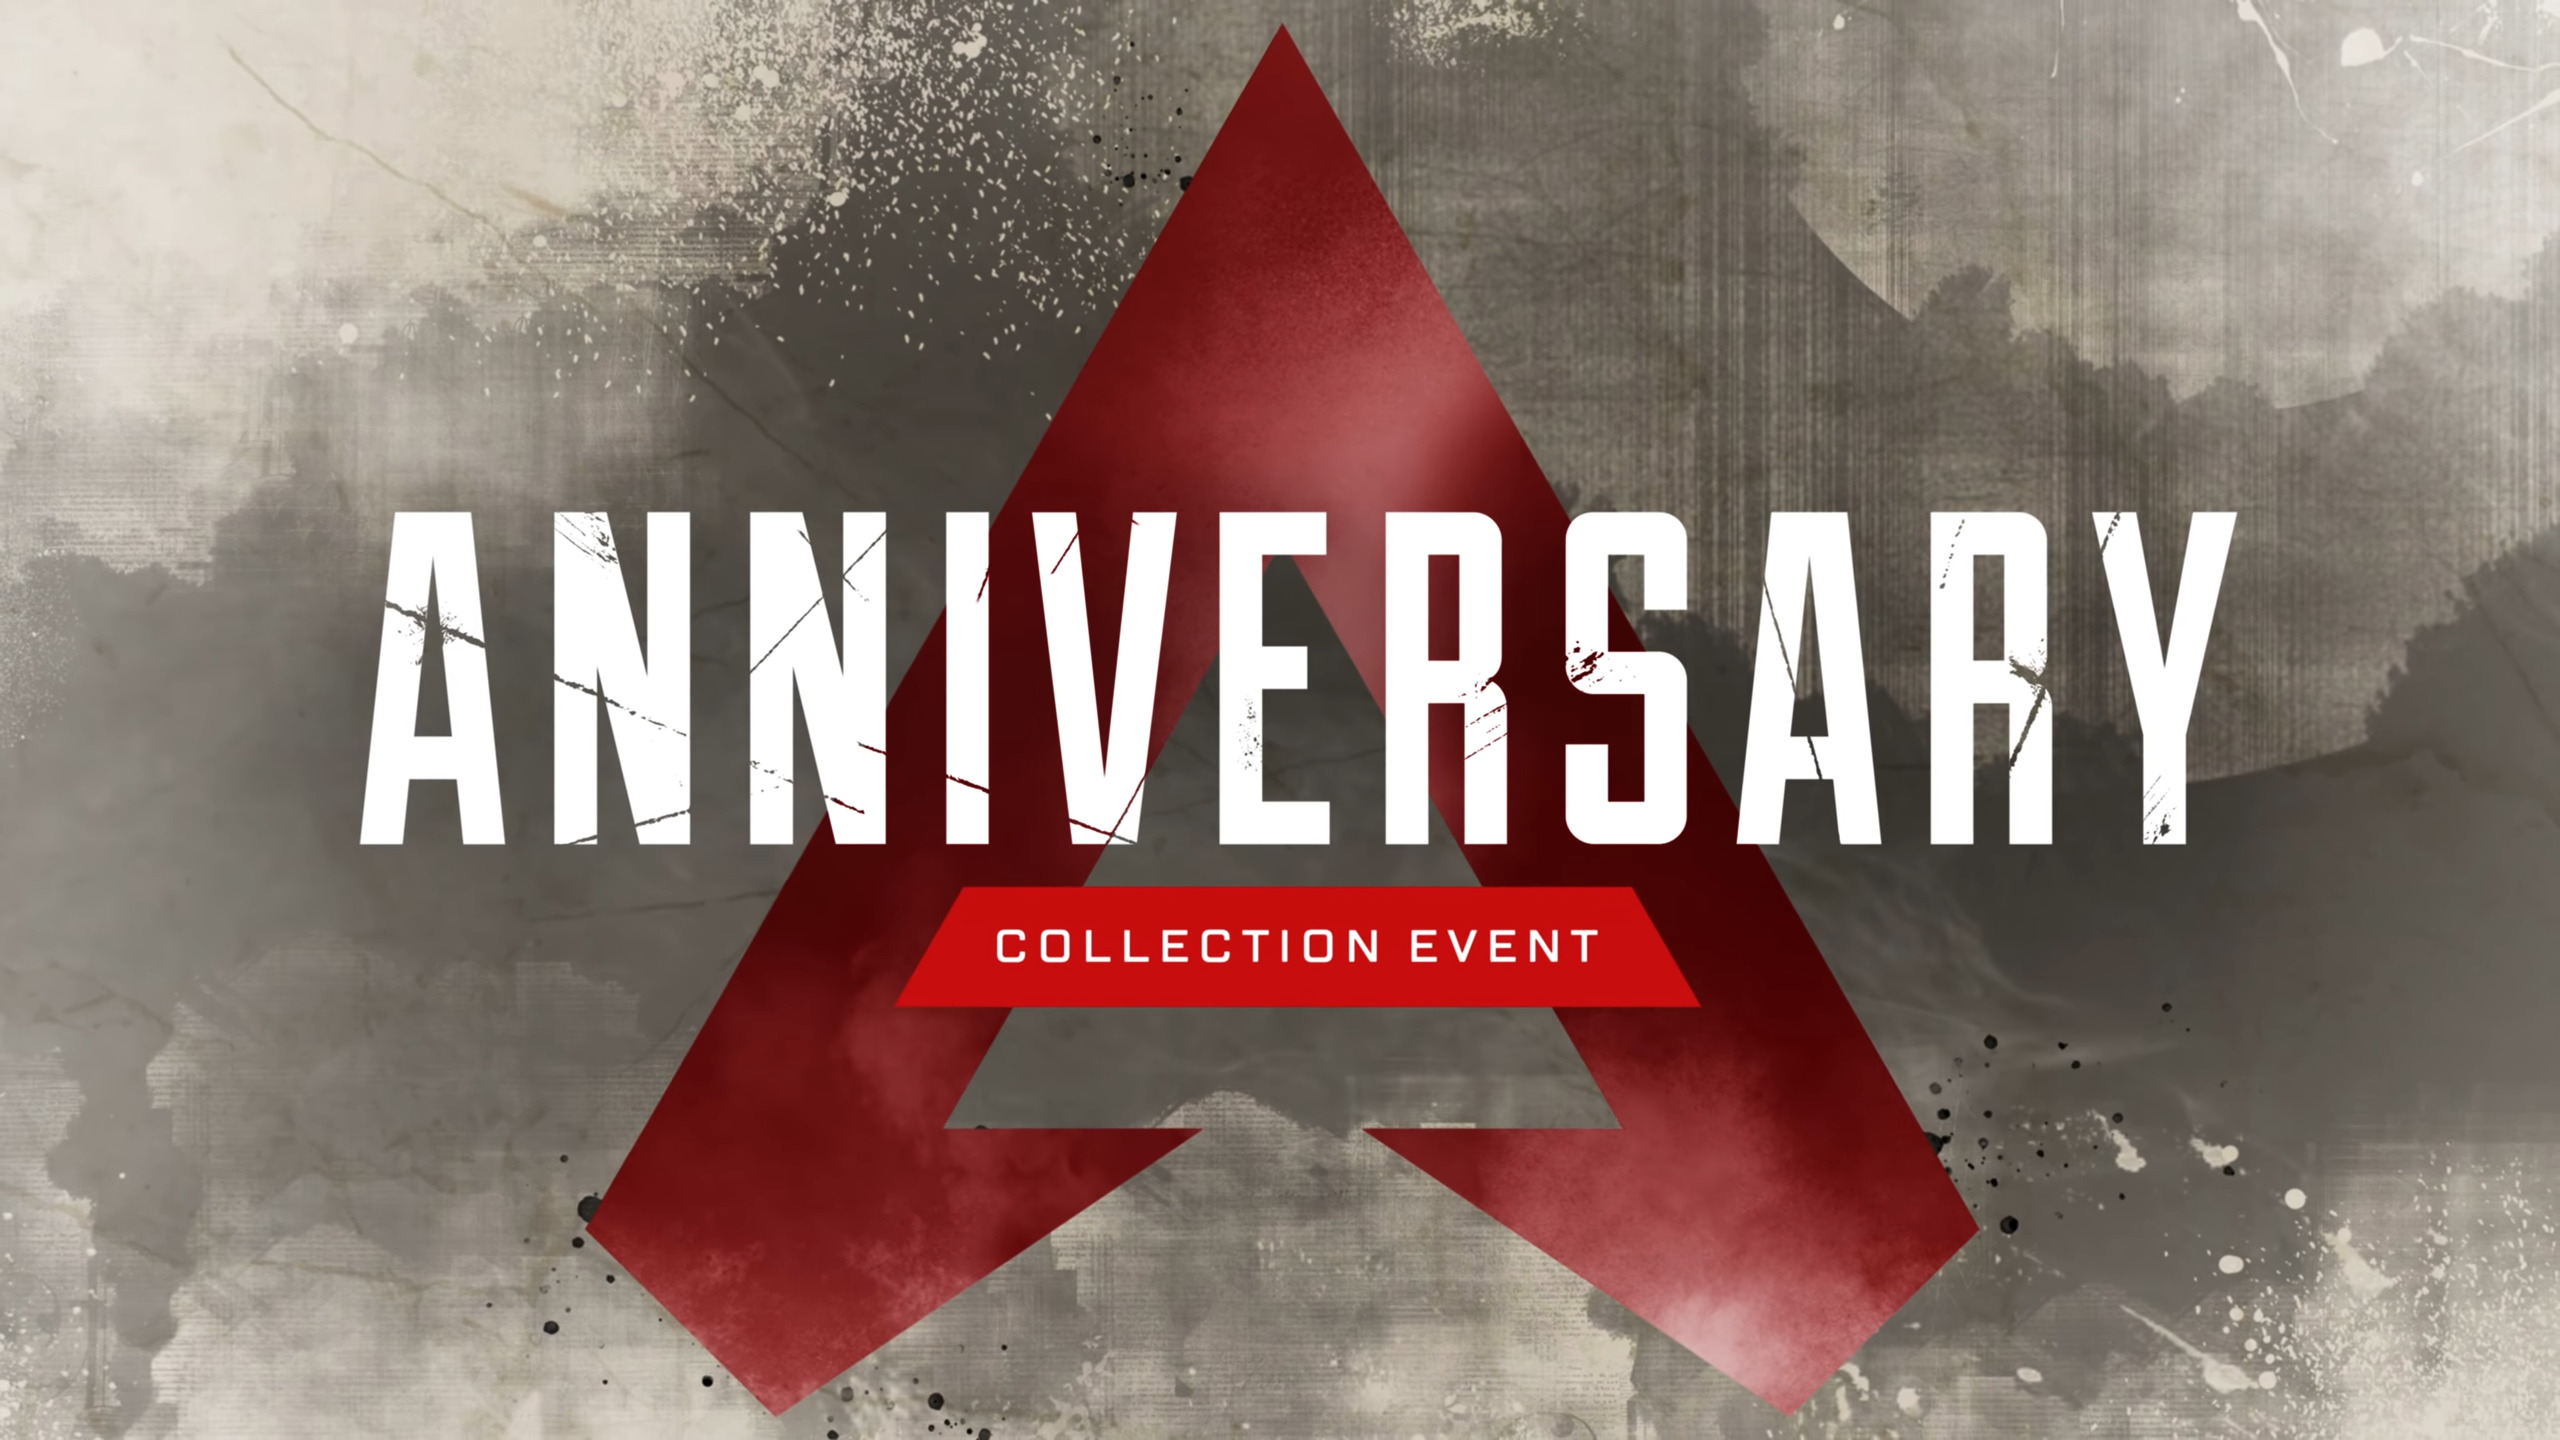 Apex Legends Anniversary Collection Event Starts Today, Free Prizes And LTM Included